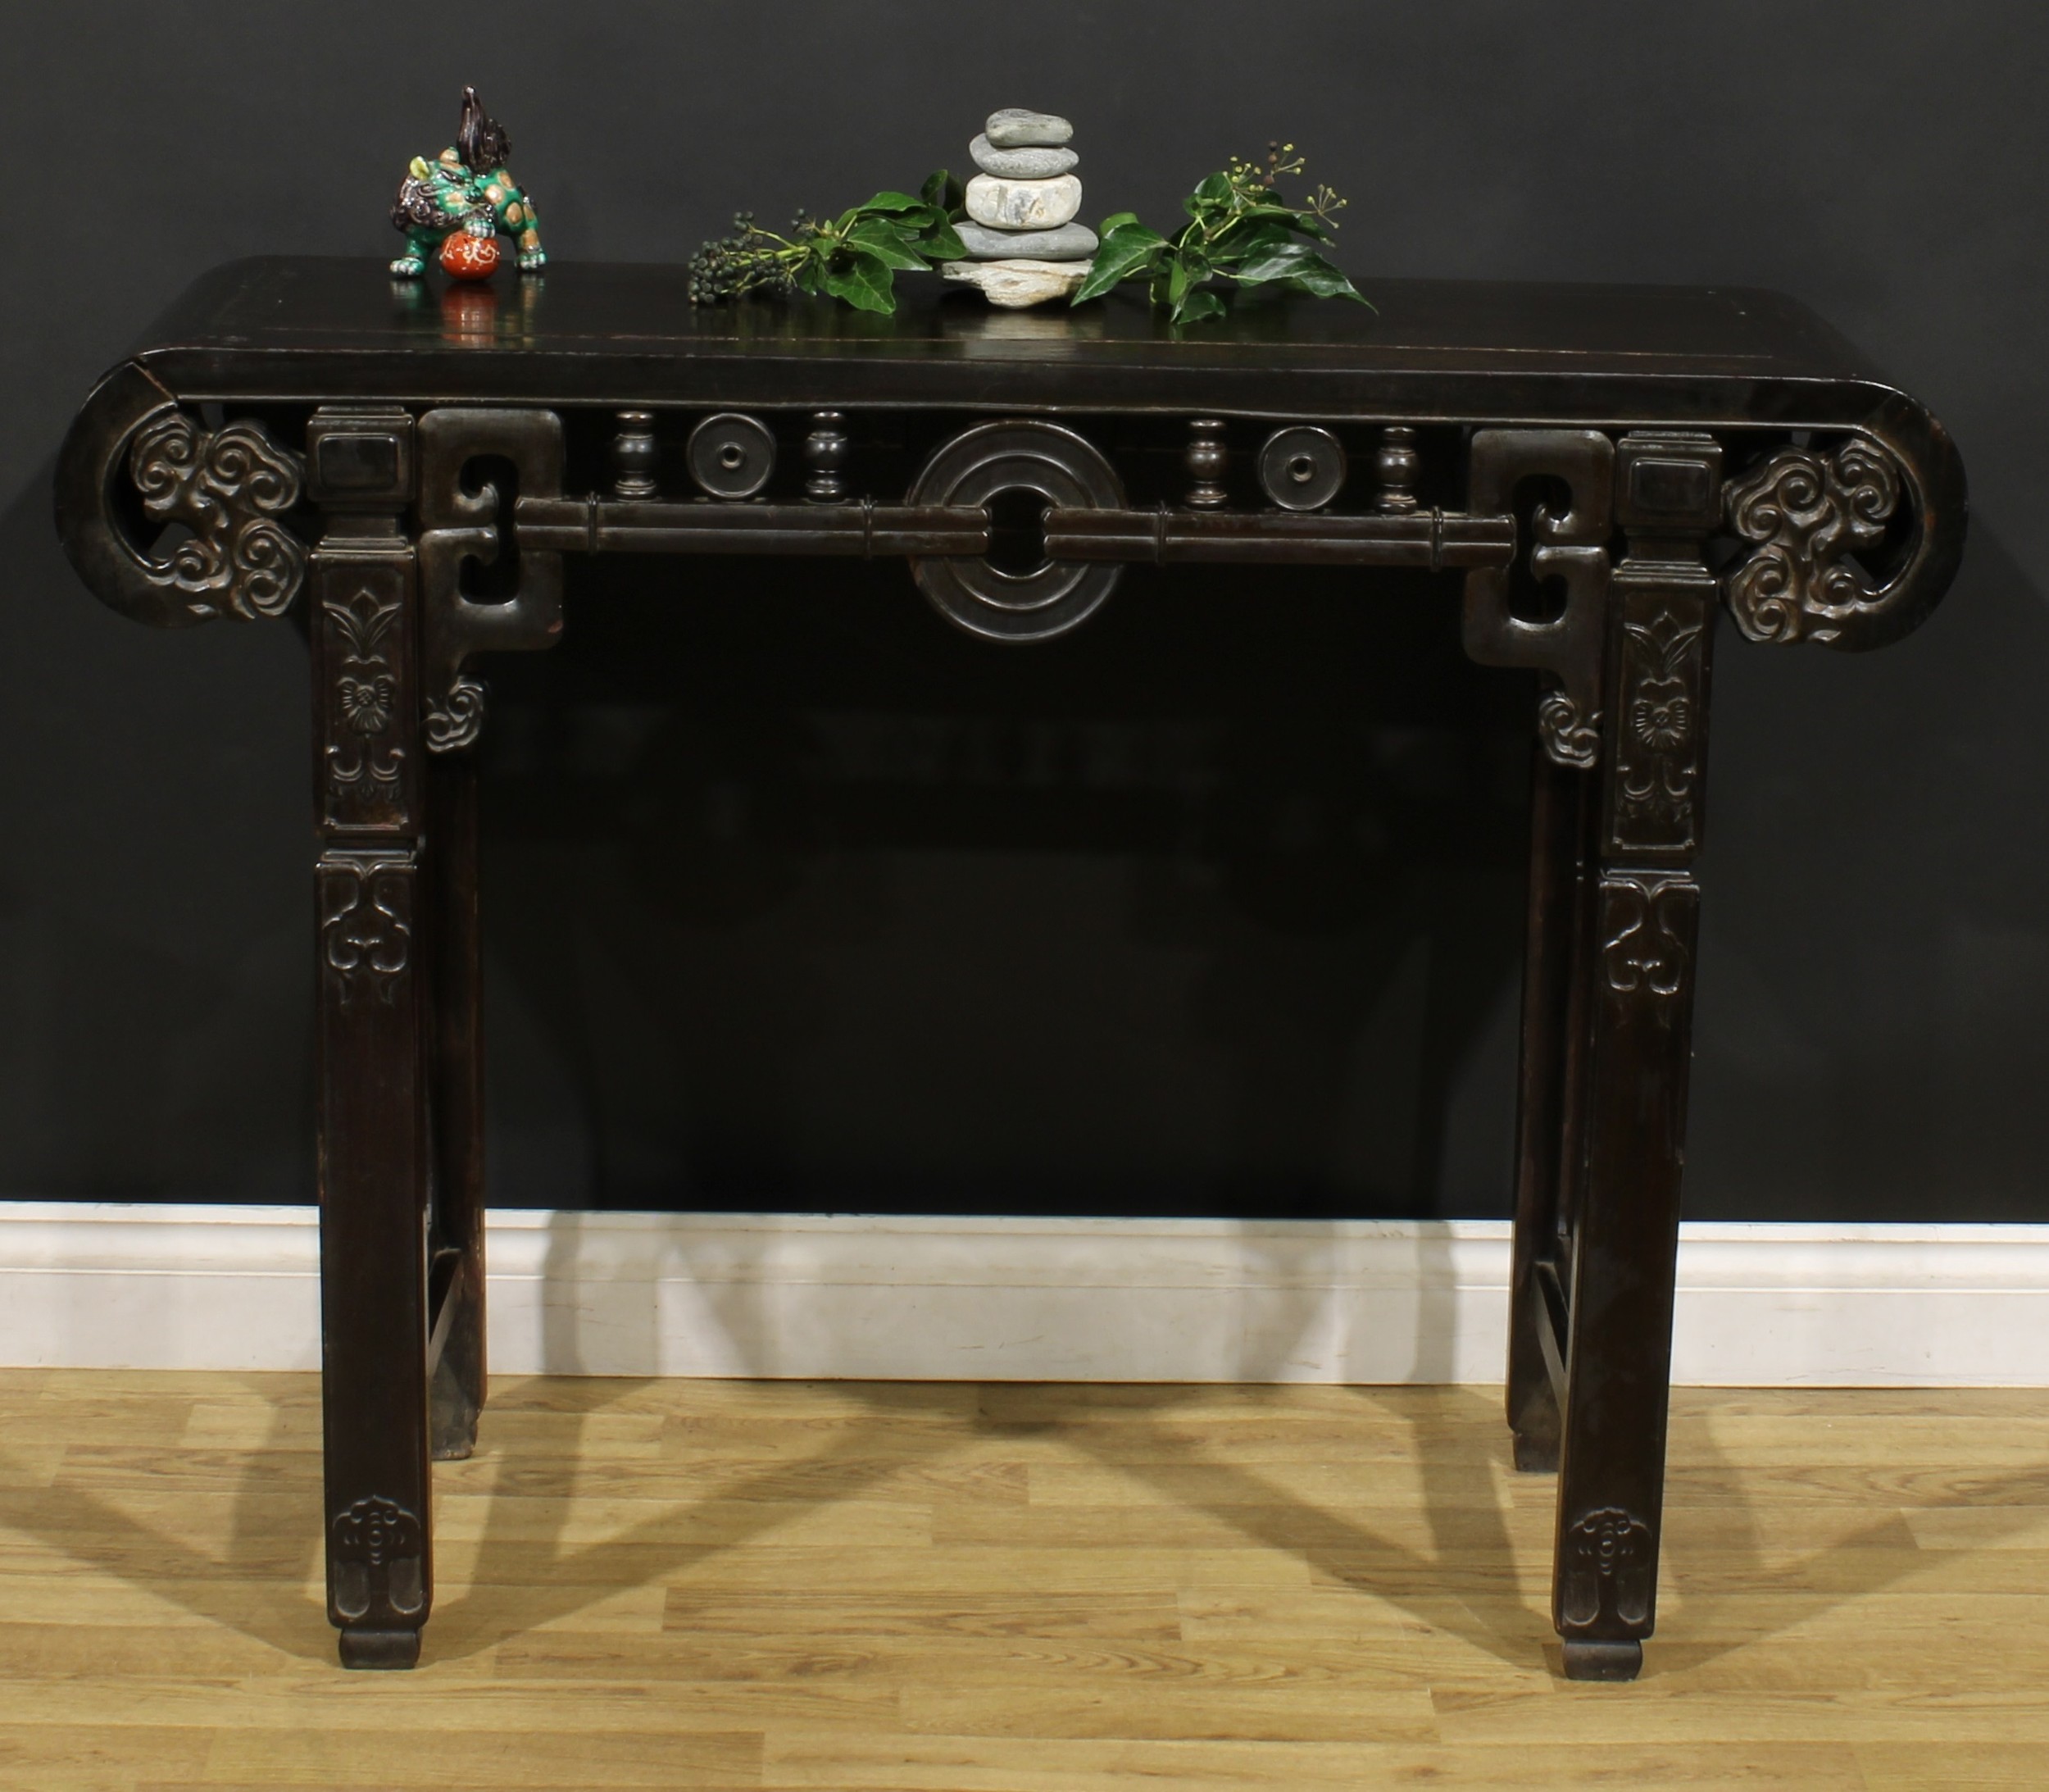 A Chinese hardwood altar table, rectangular top with scroll ends carved with ruyi heads, shaped